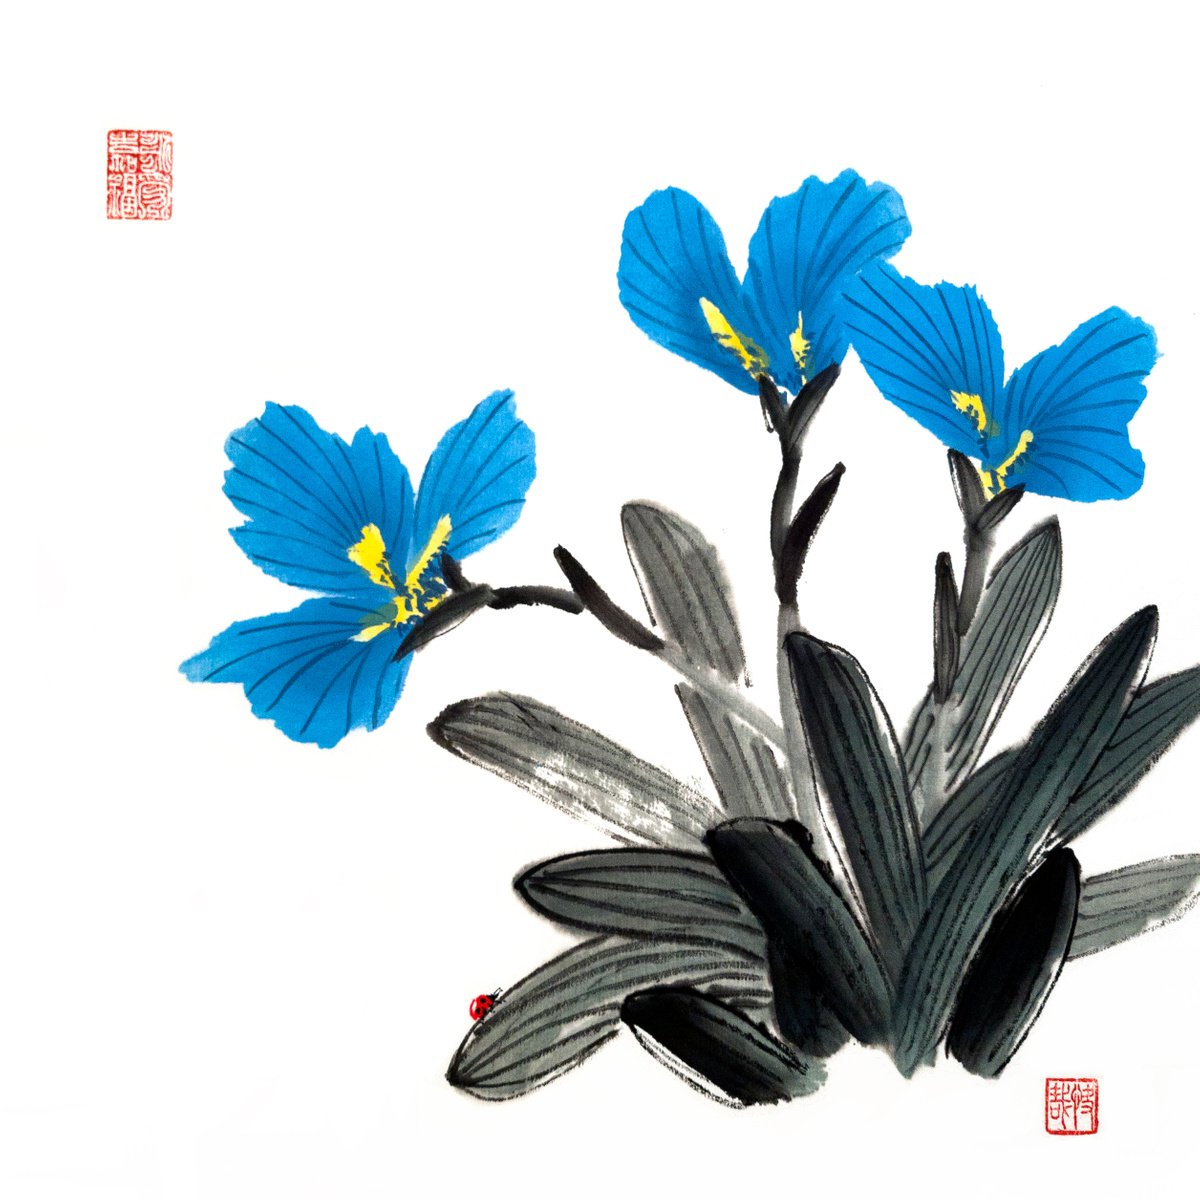 Blue irises and red ladybug - Oriental Chinese Ink Painting by Ilana Shechter